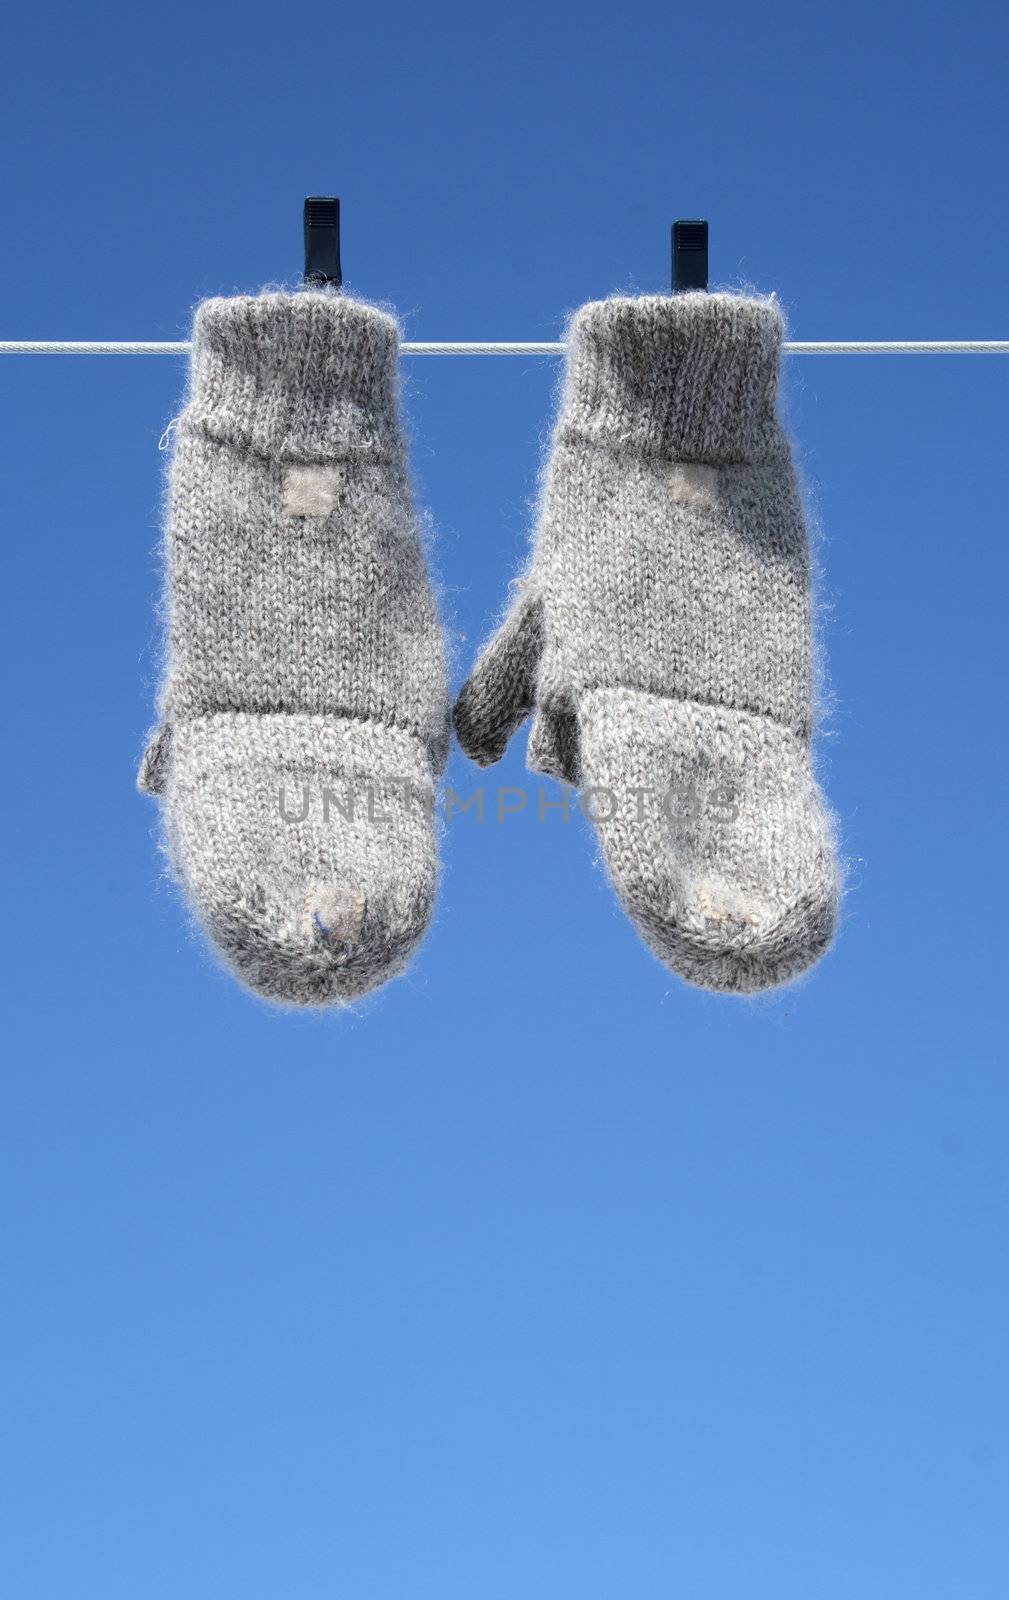 Mittens hanging to dry � the winter is over by anikasalsera